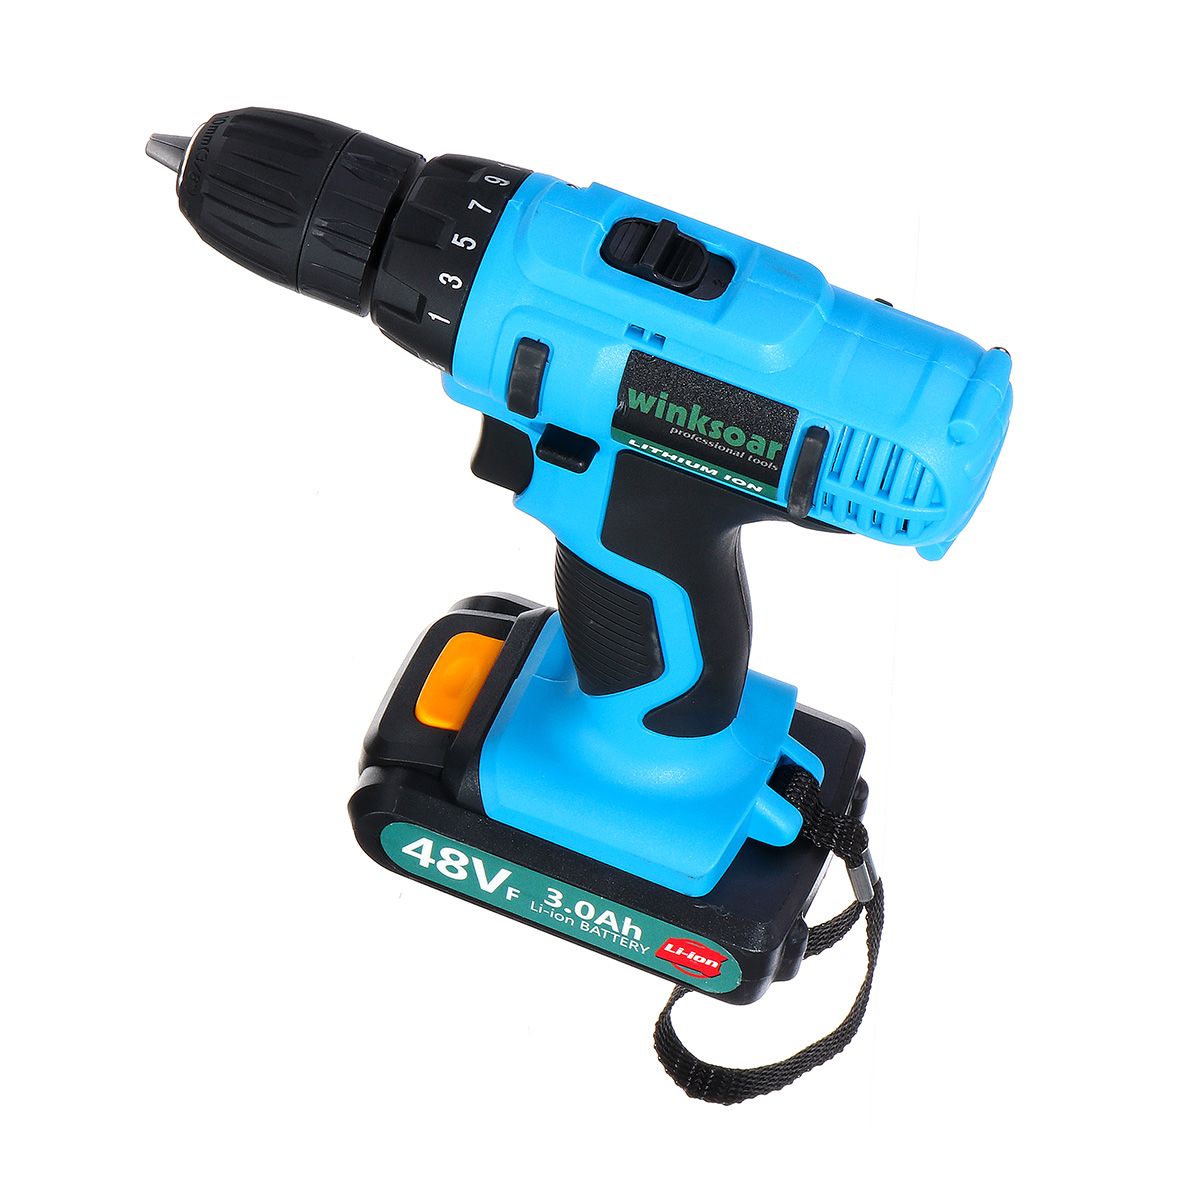 48VF-3000mAh-Electric-Drill-Cordless-Rechargeable-Power-Screwdriver-251-Torque-W-1-or-2-Li-ion-Batte-1511872